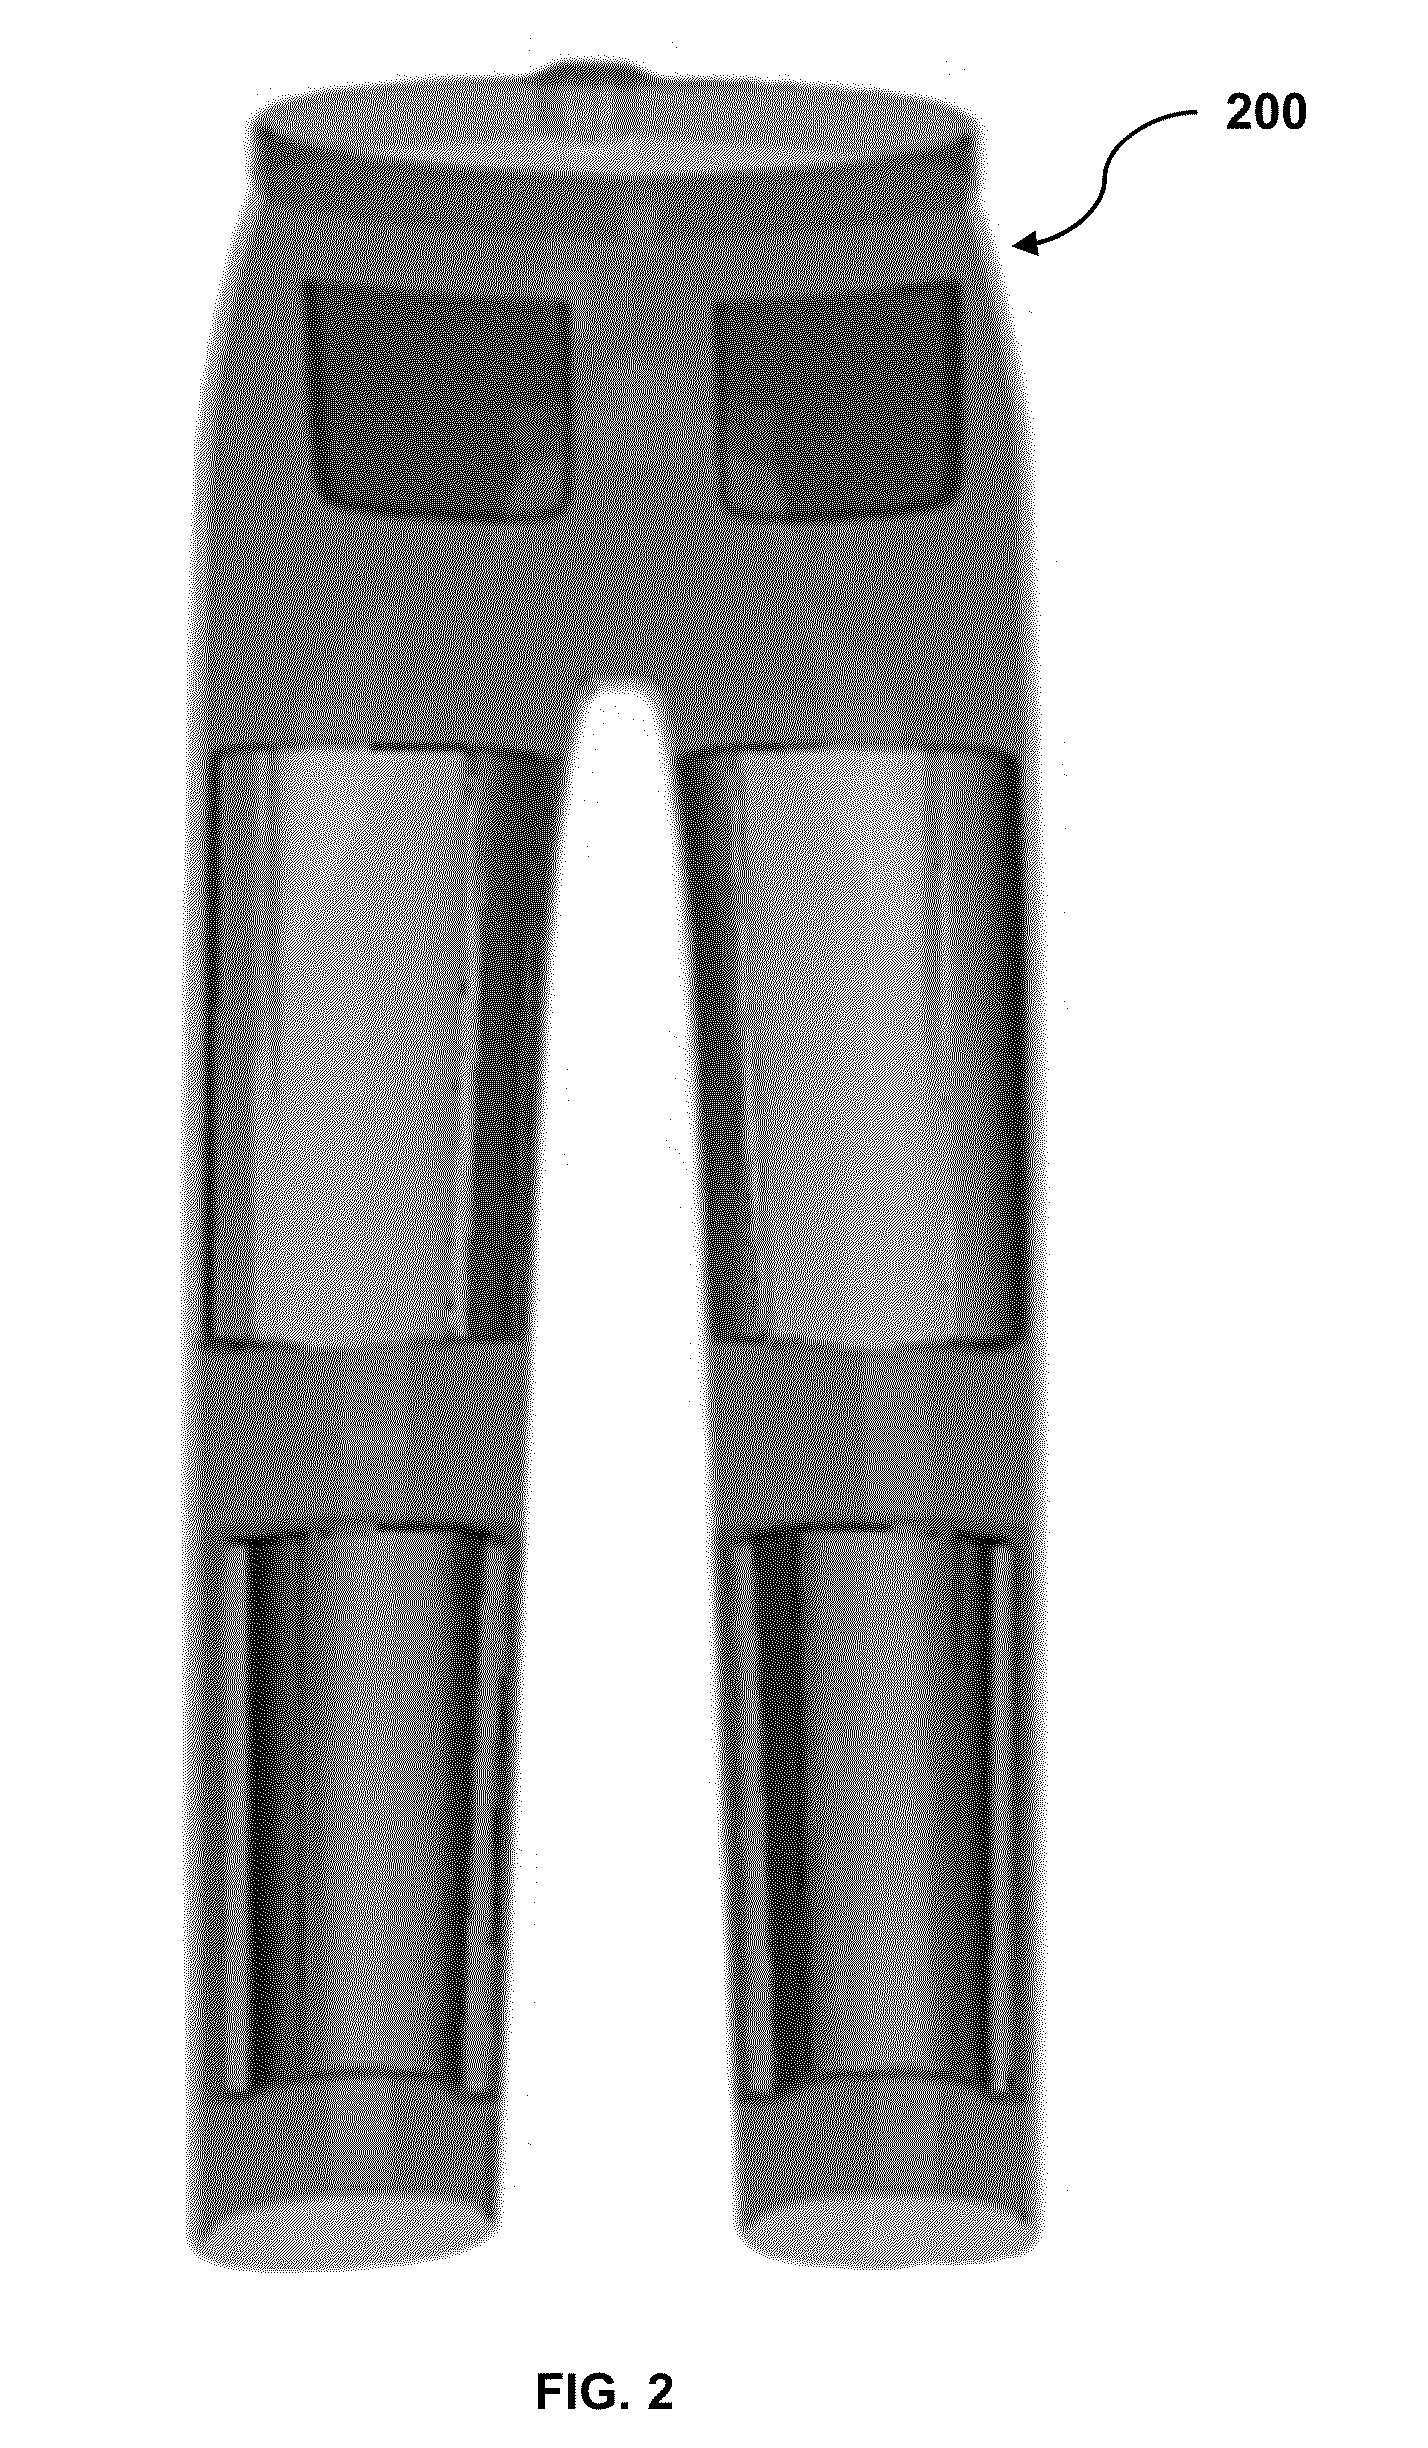 Weighted fabric articles and related materials and methods